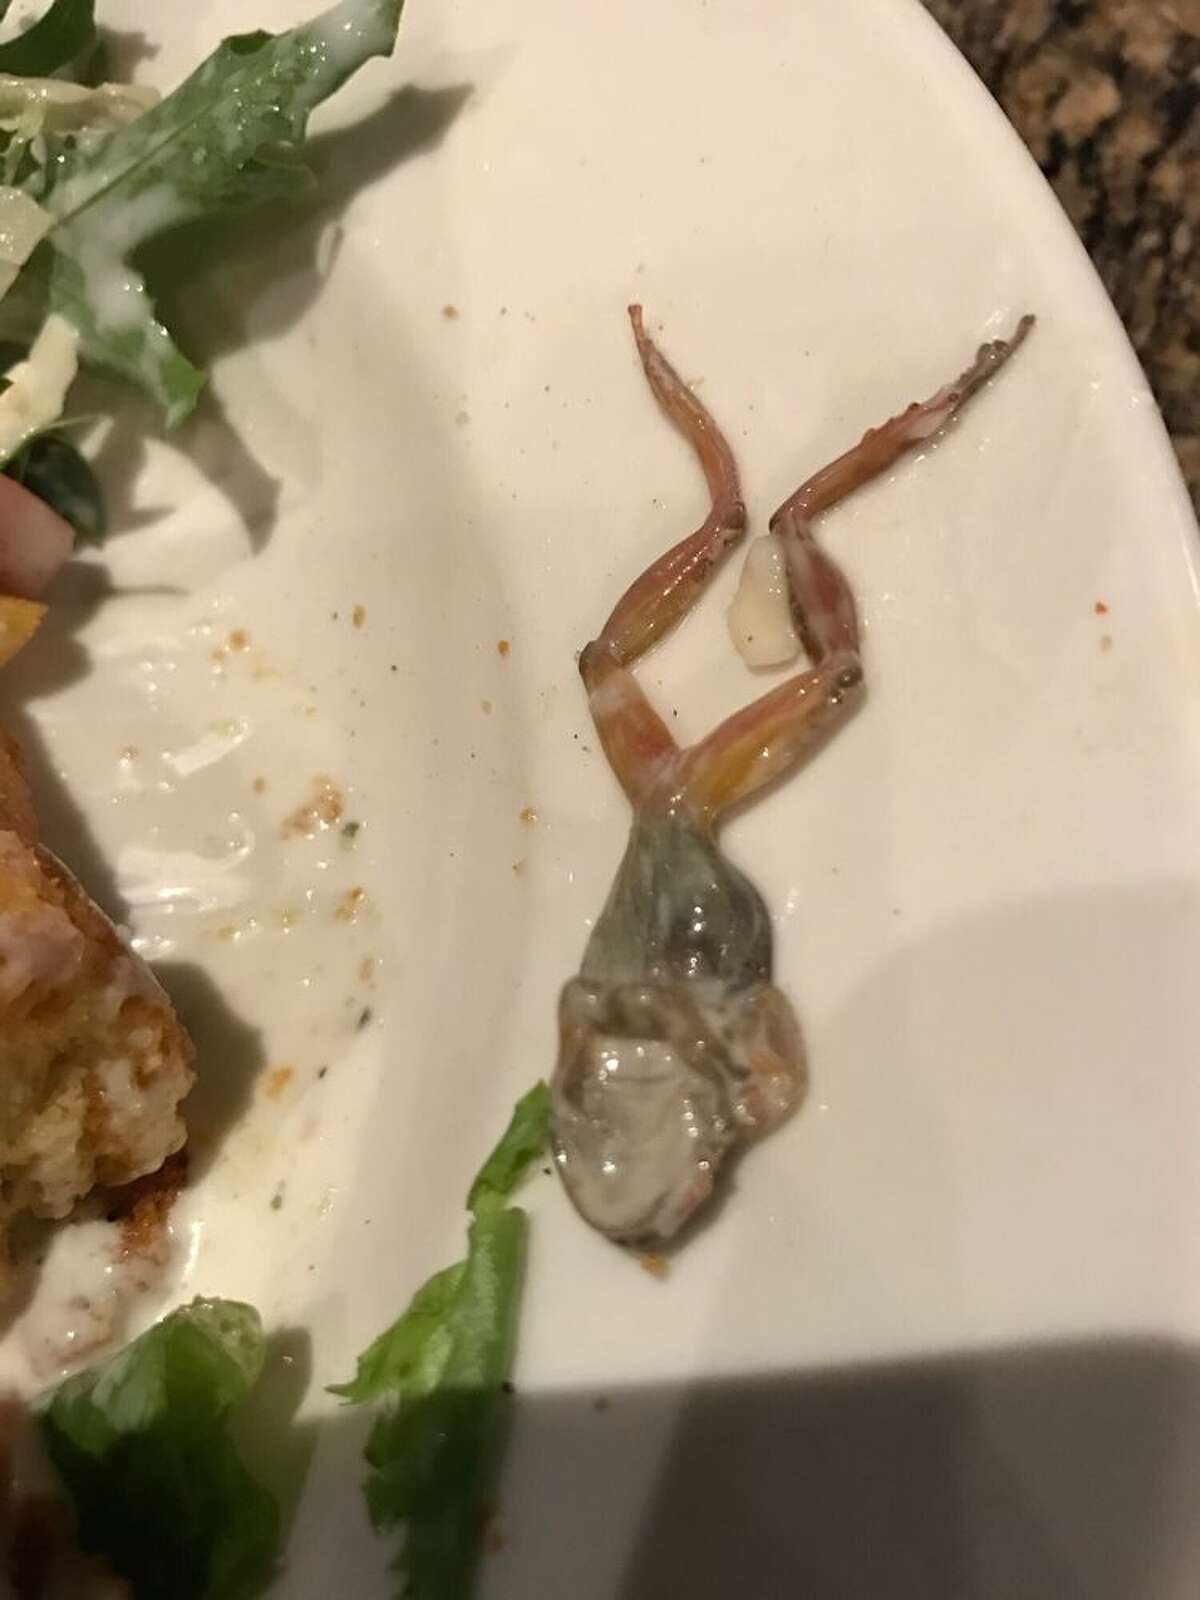 A California woman found a dead frog in her salad at a BJ's Restaurant and Brewhouse.